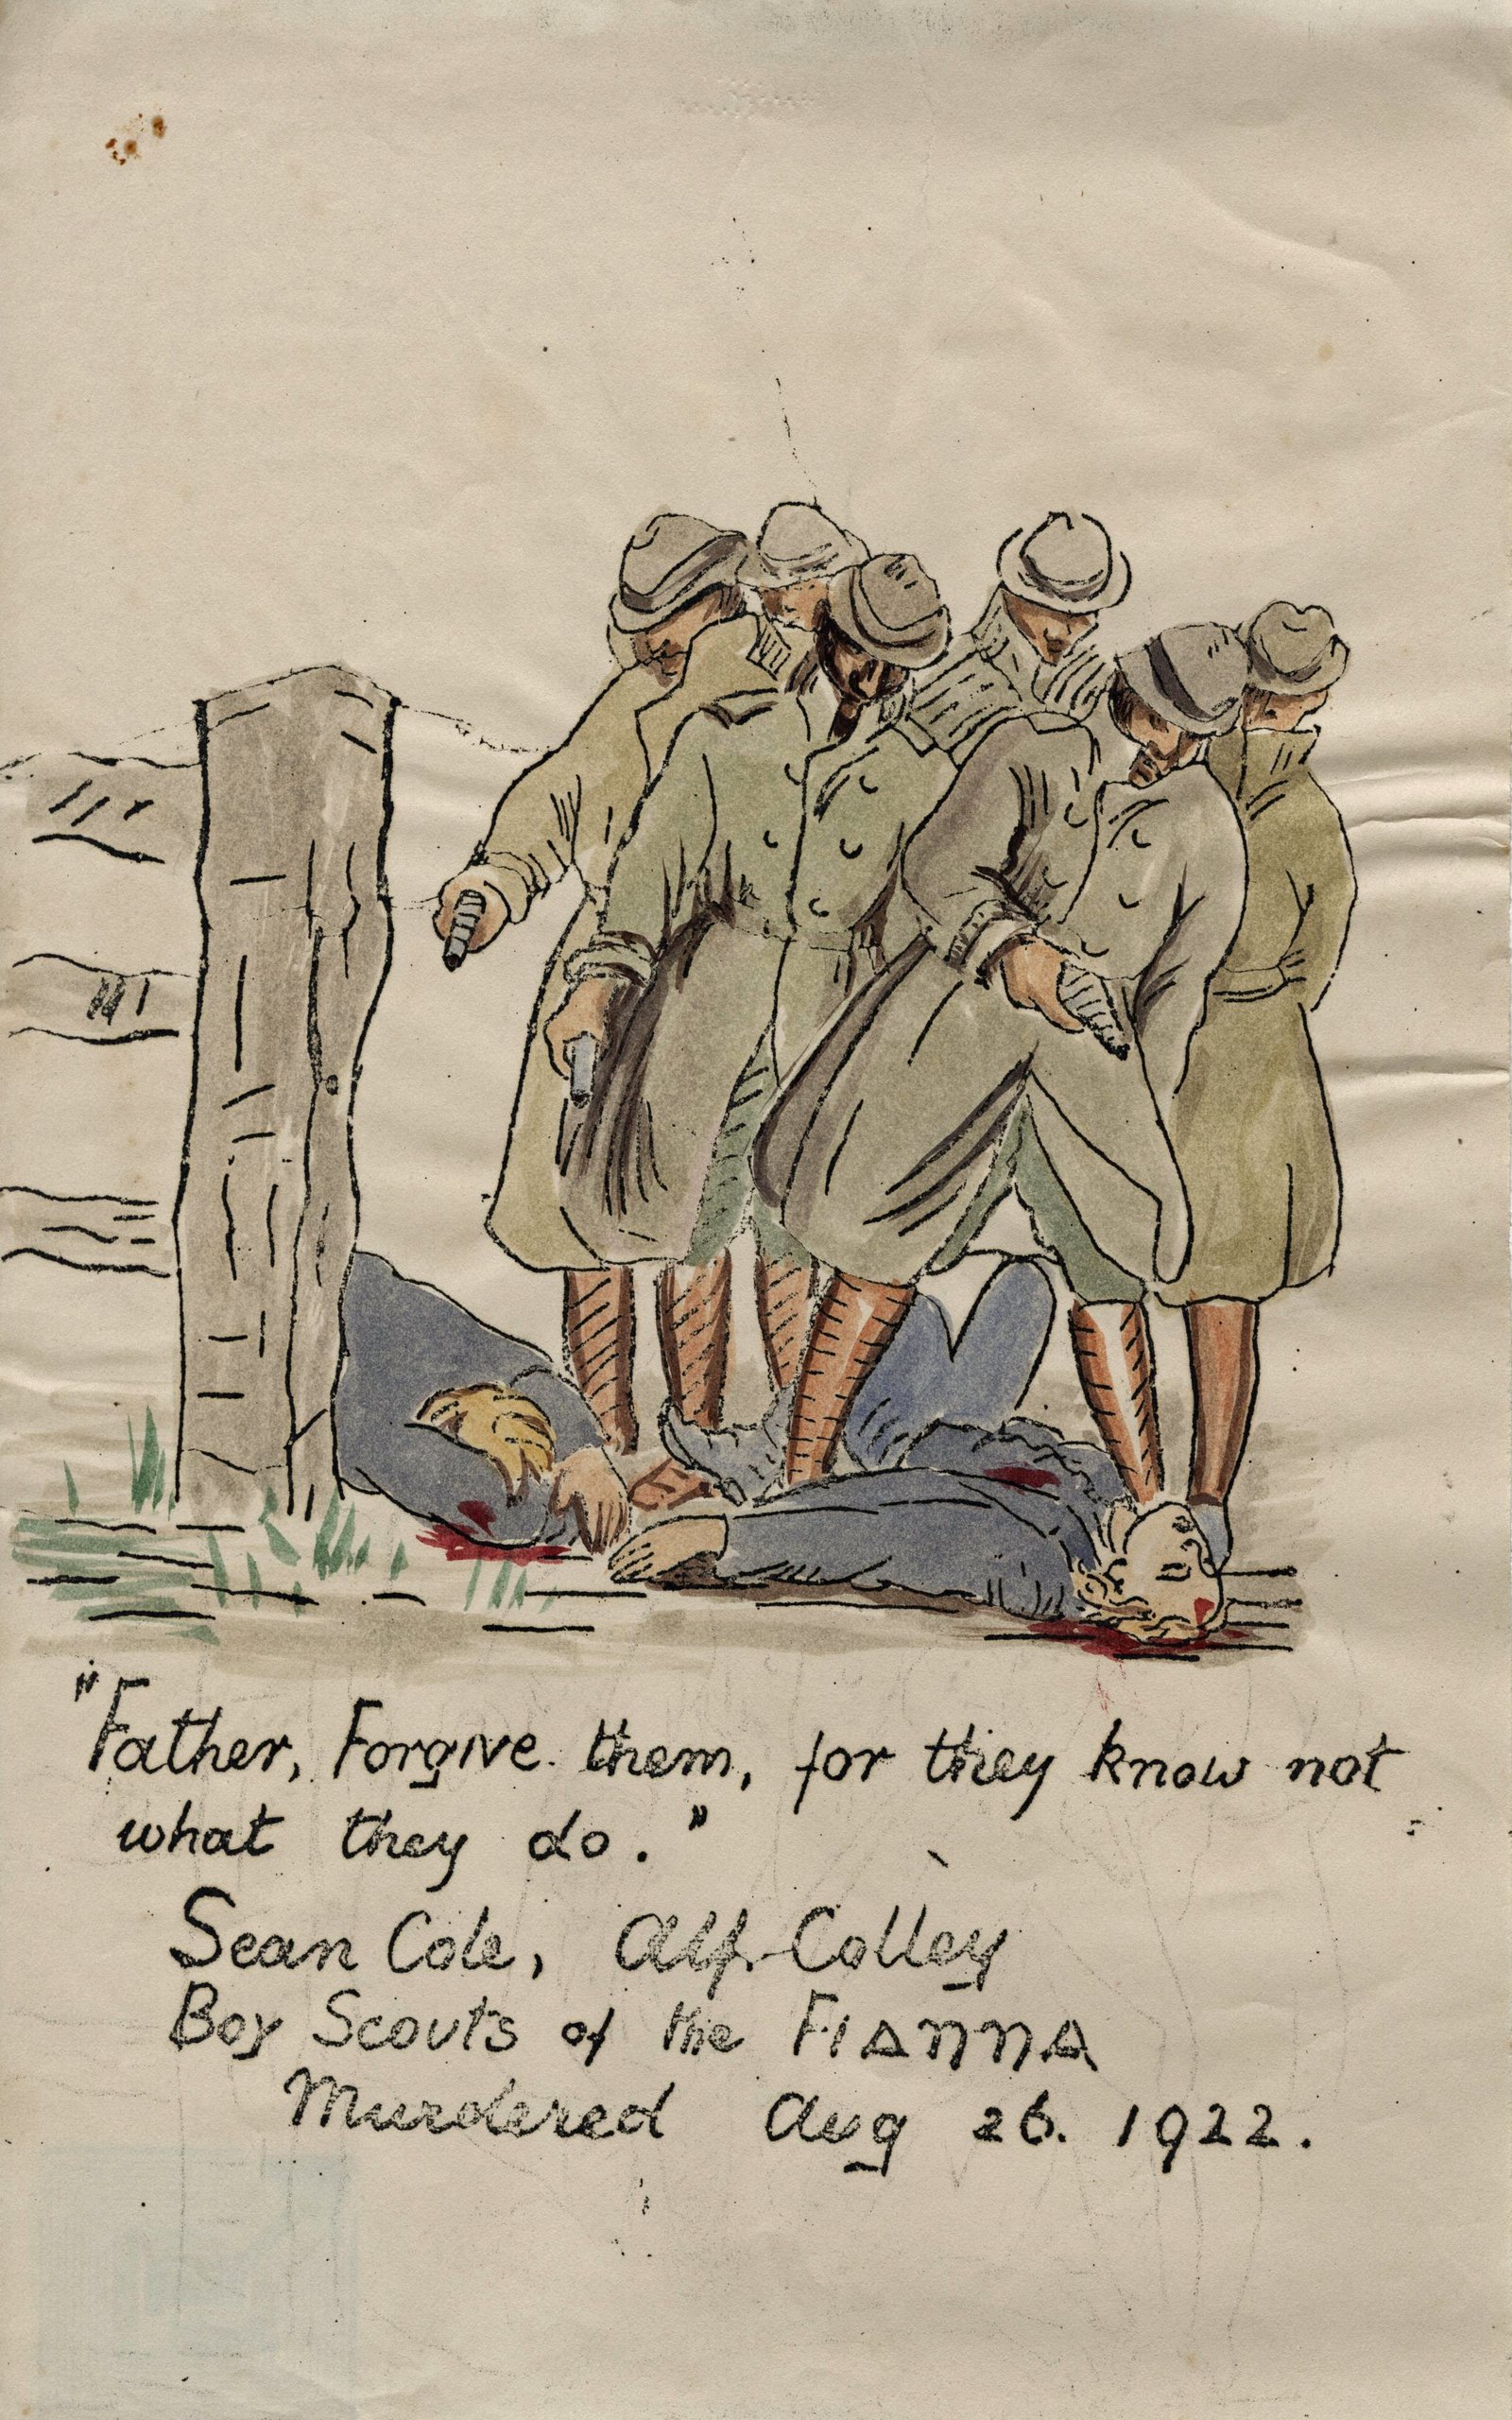 Image - Drawing by Constance Markievicz depicting the aftermath of two notorious killings of Republican activists by men, CID or army from Oriel House. Image: Dublin City Libraries and Archives